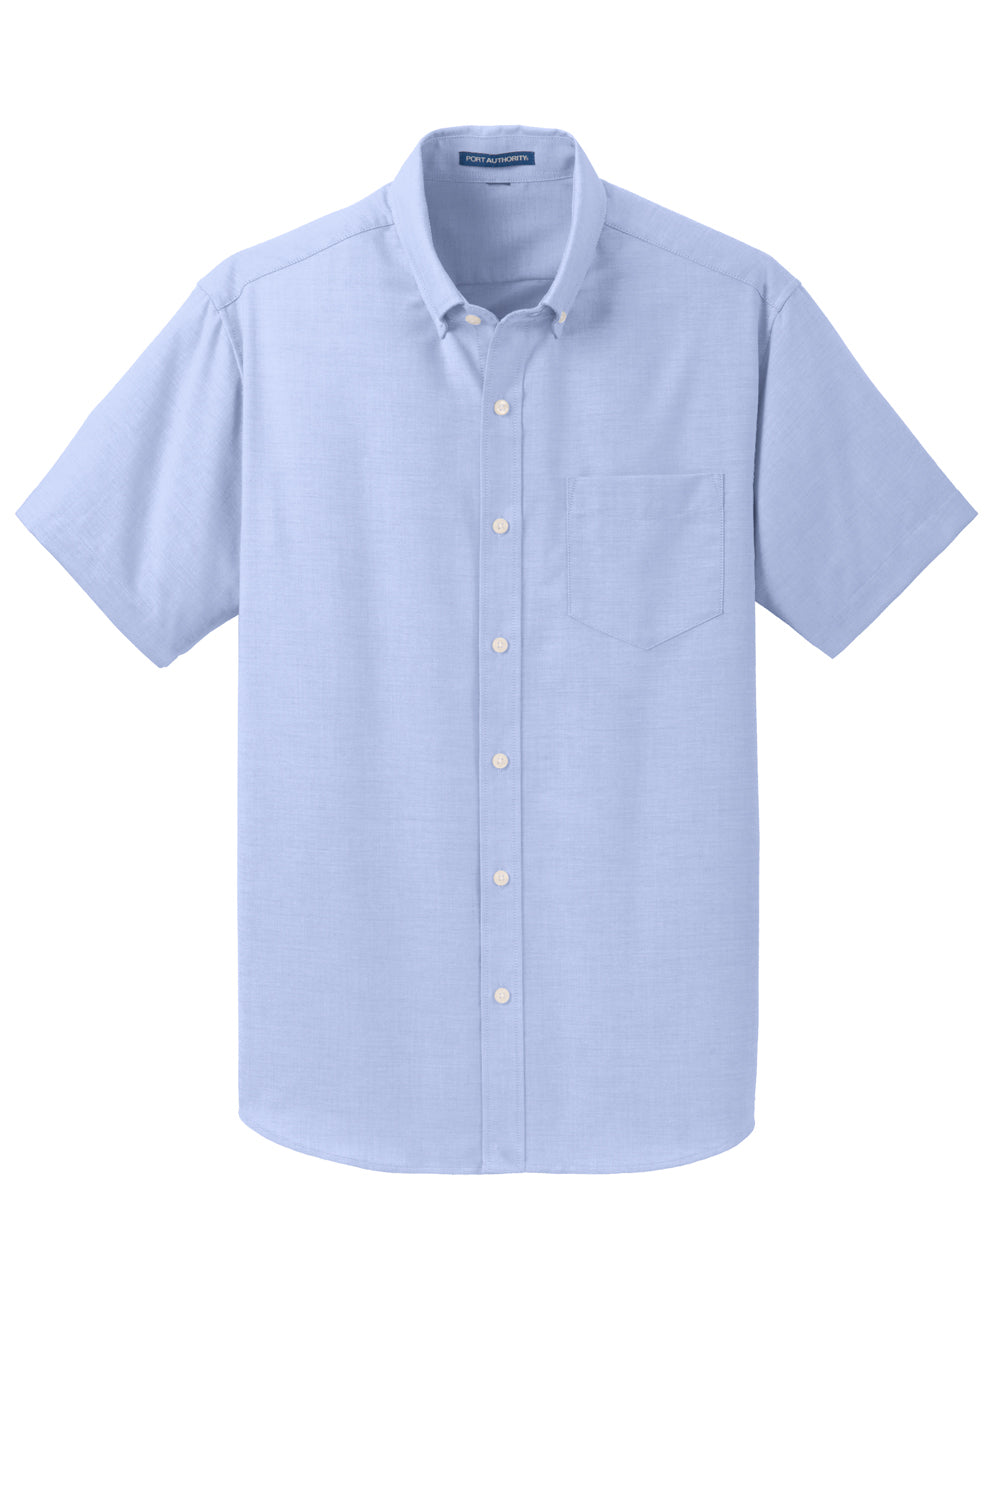 Port Authority S659 SuperPro Oxford Wrinkle Resistant Short Sleeve Button Down Shirt w/ Pocket Oxford Blue Flat Front